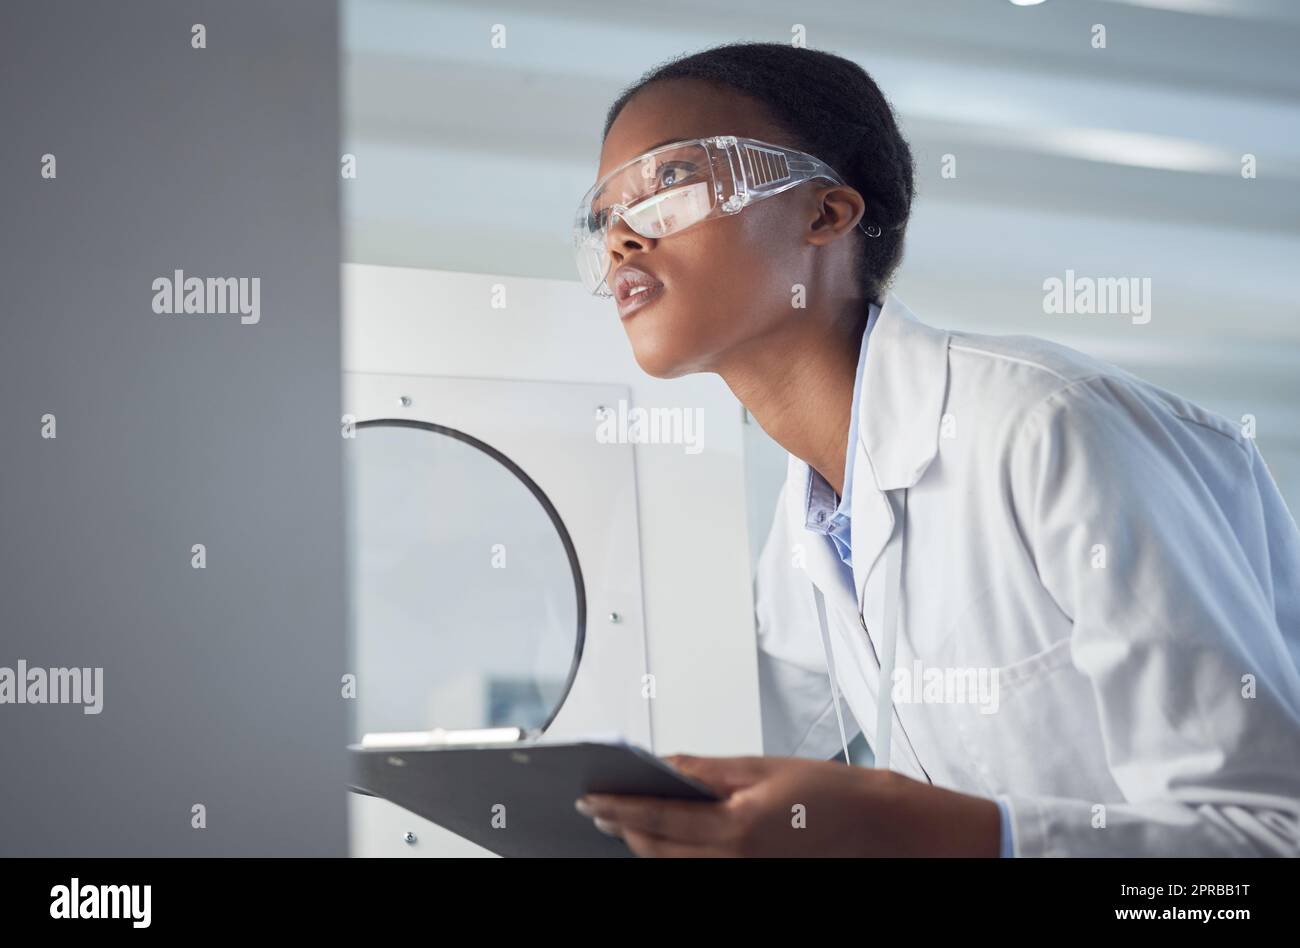 Building knowledge about the world through careful observations. a young scientist working in a lab. Stock Photo